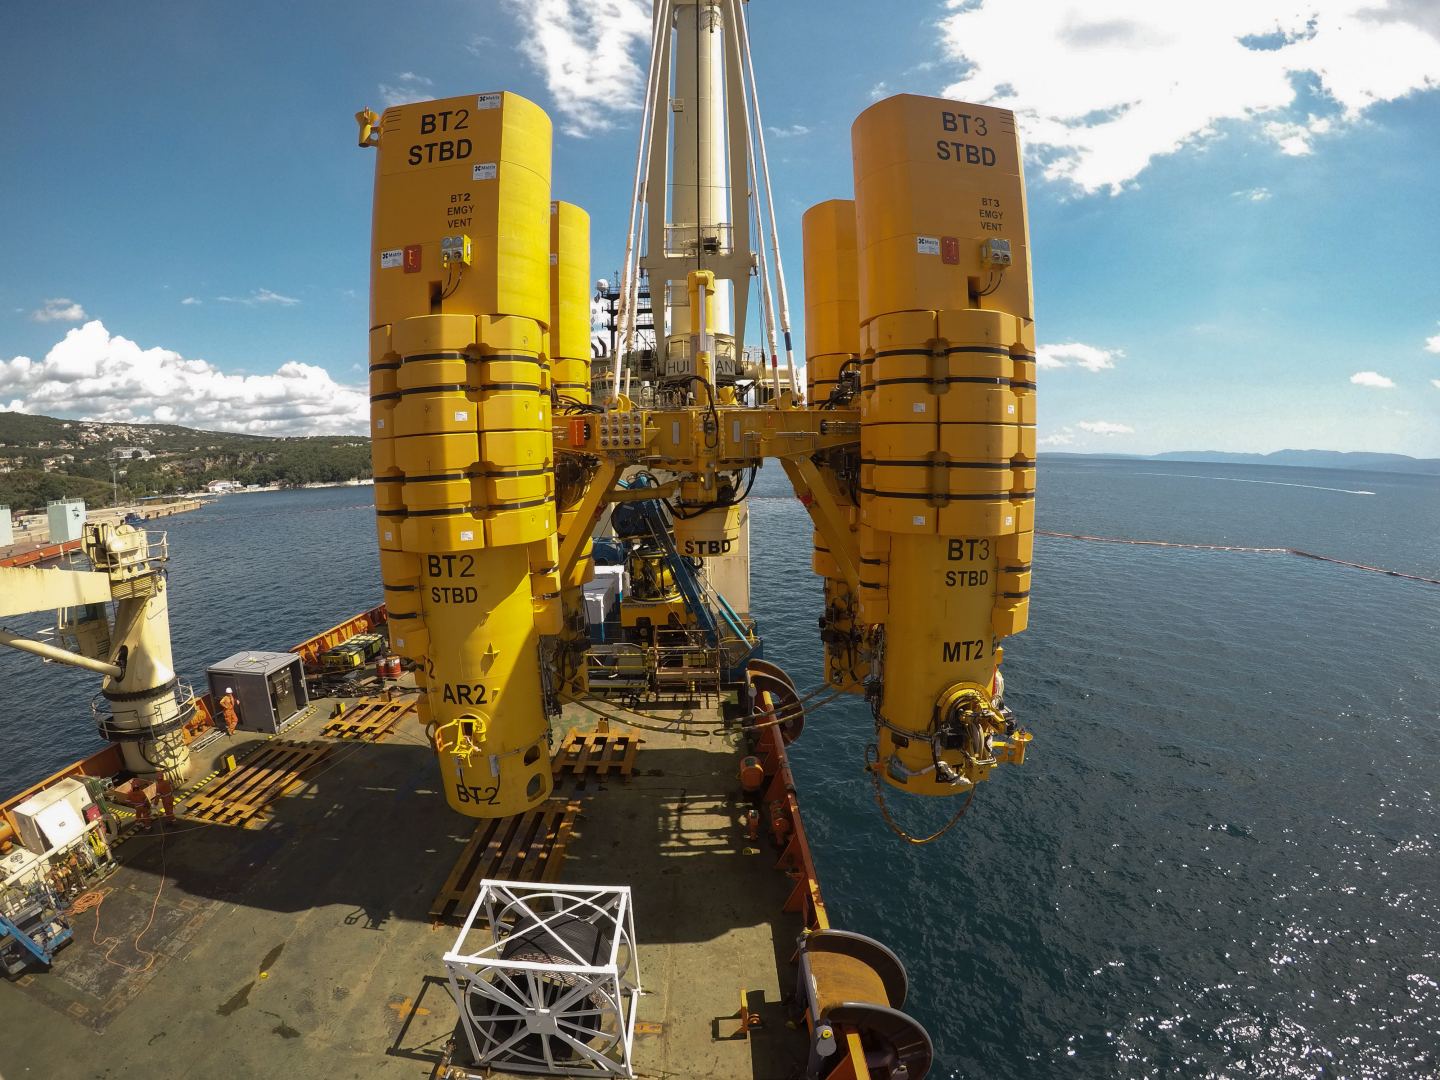 Saipem sees decrease in revenues due to slowdown of certain projects